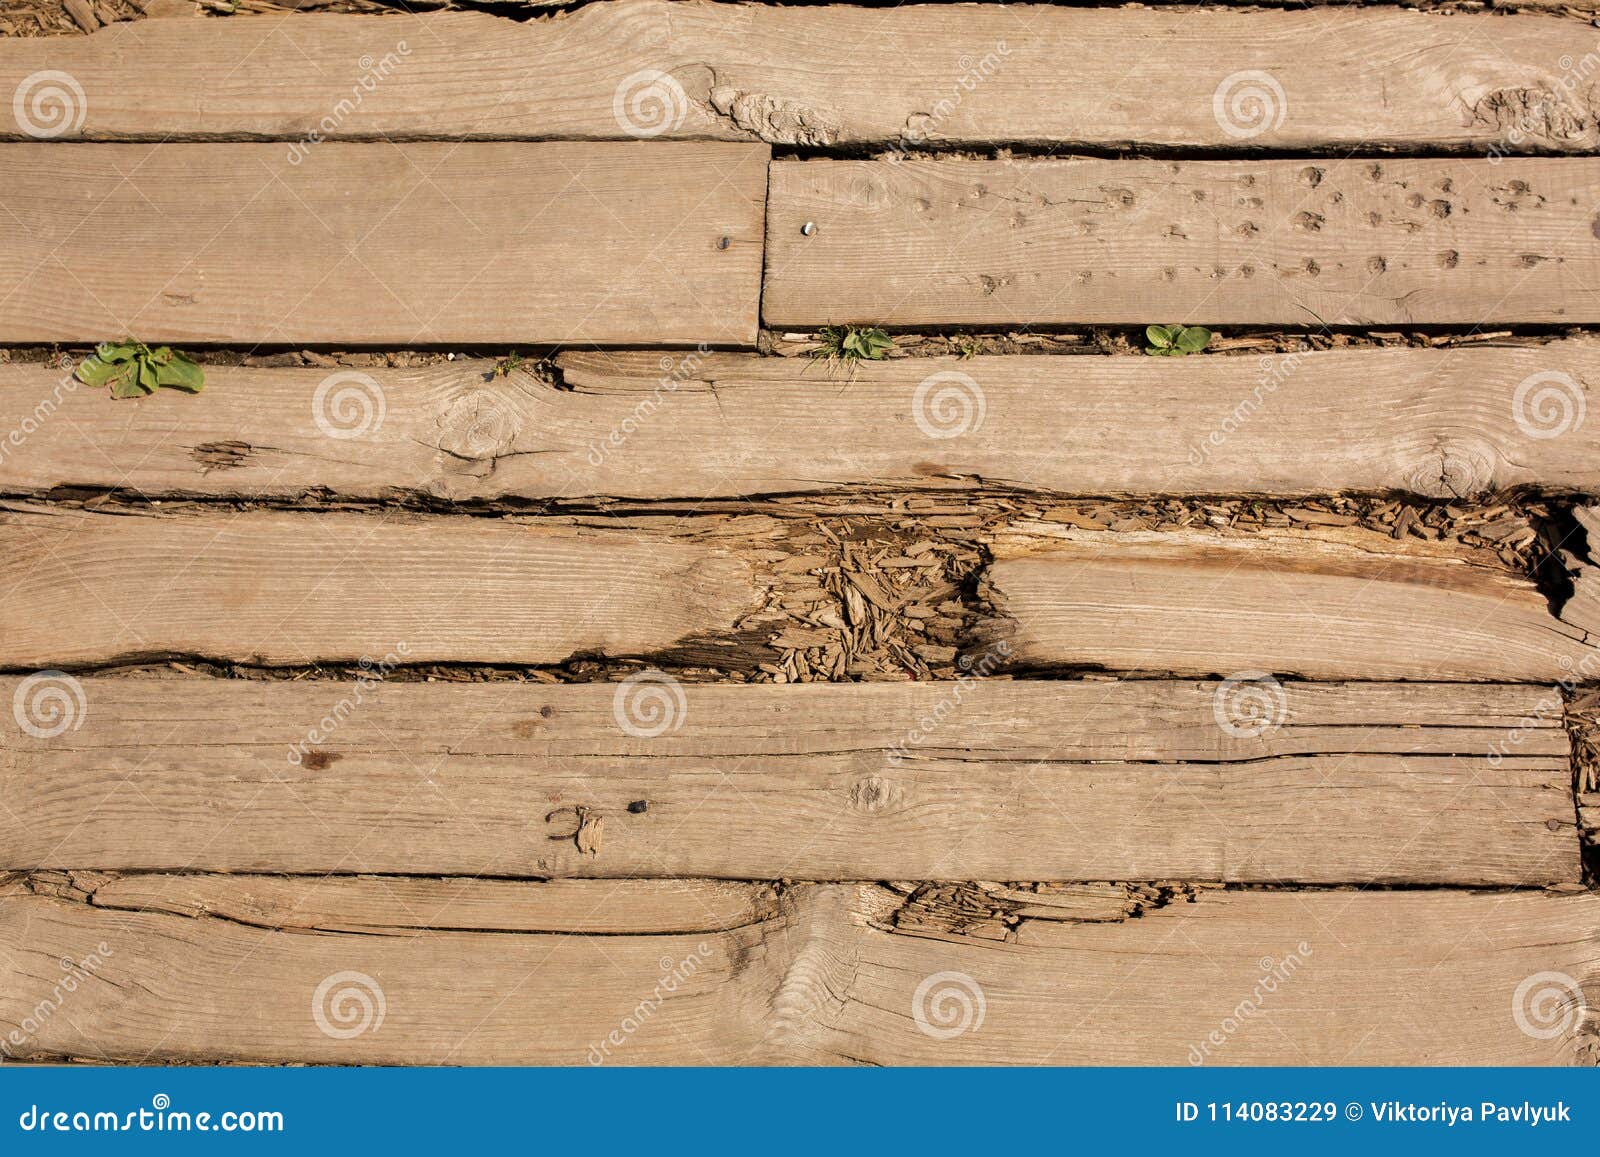 Closeup Fragment Of Cracked Wood Floor With Nails And Holes Stock